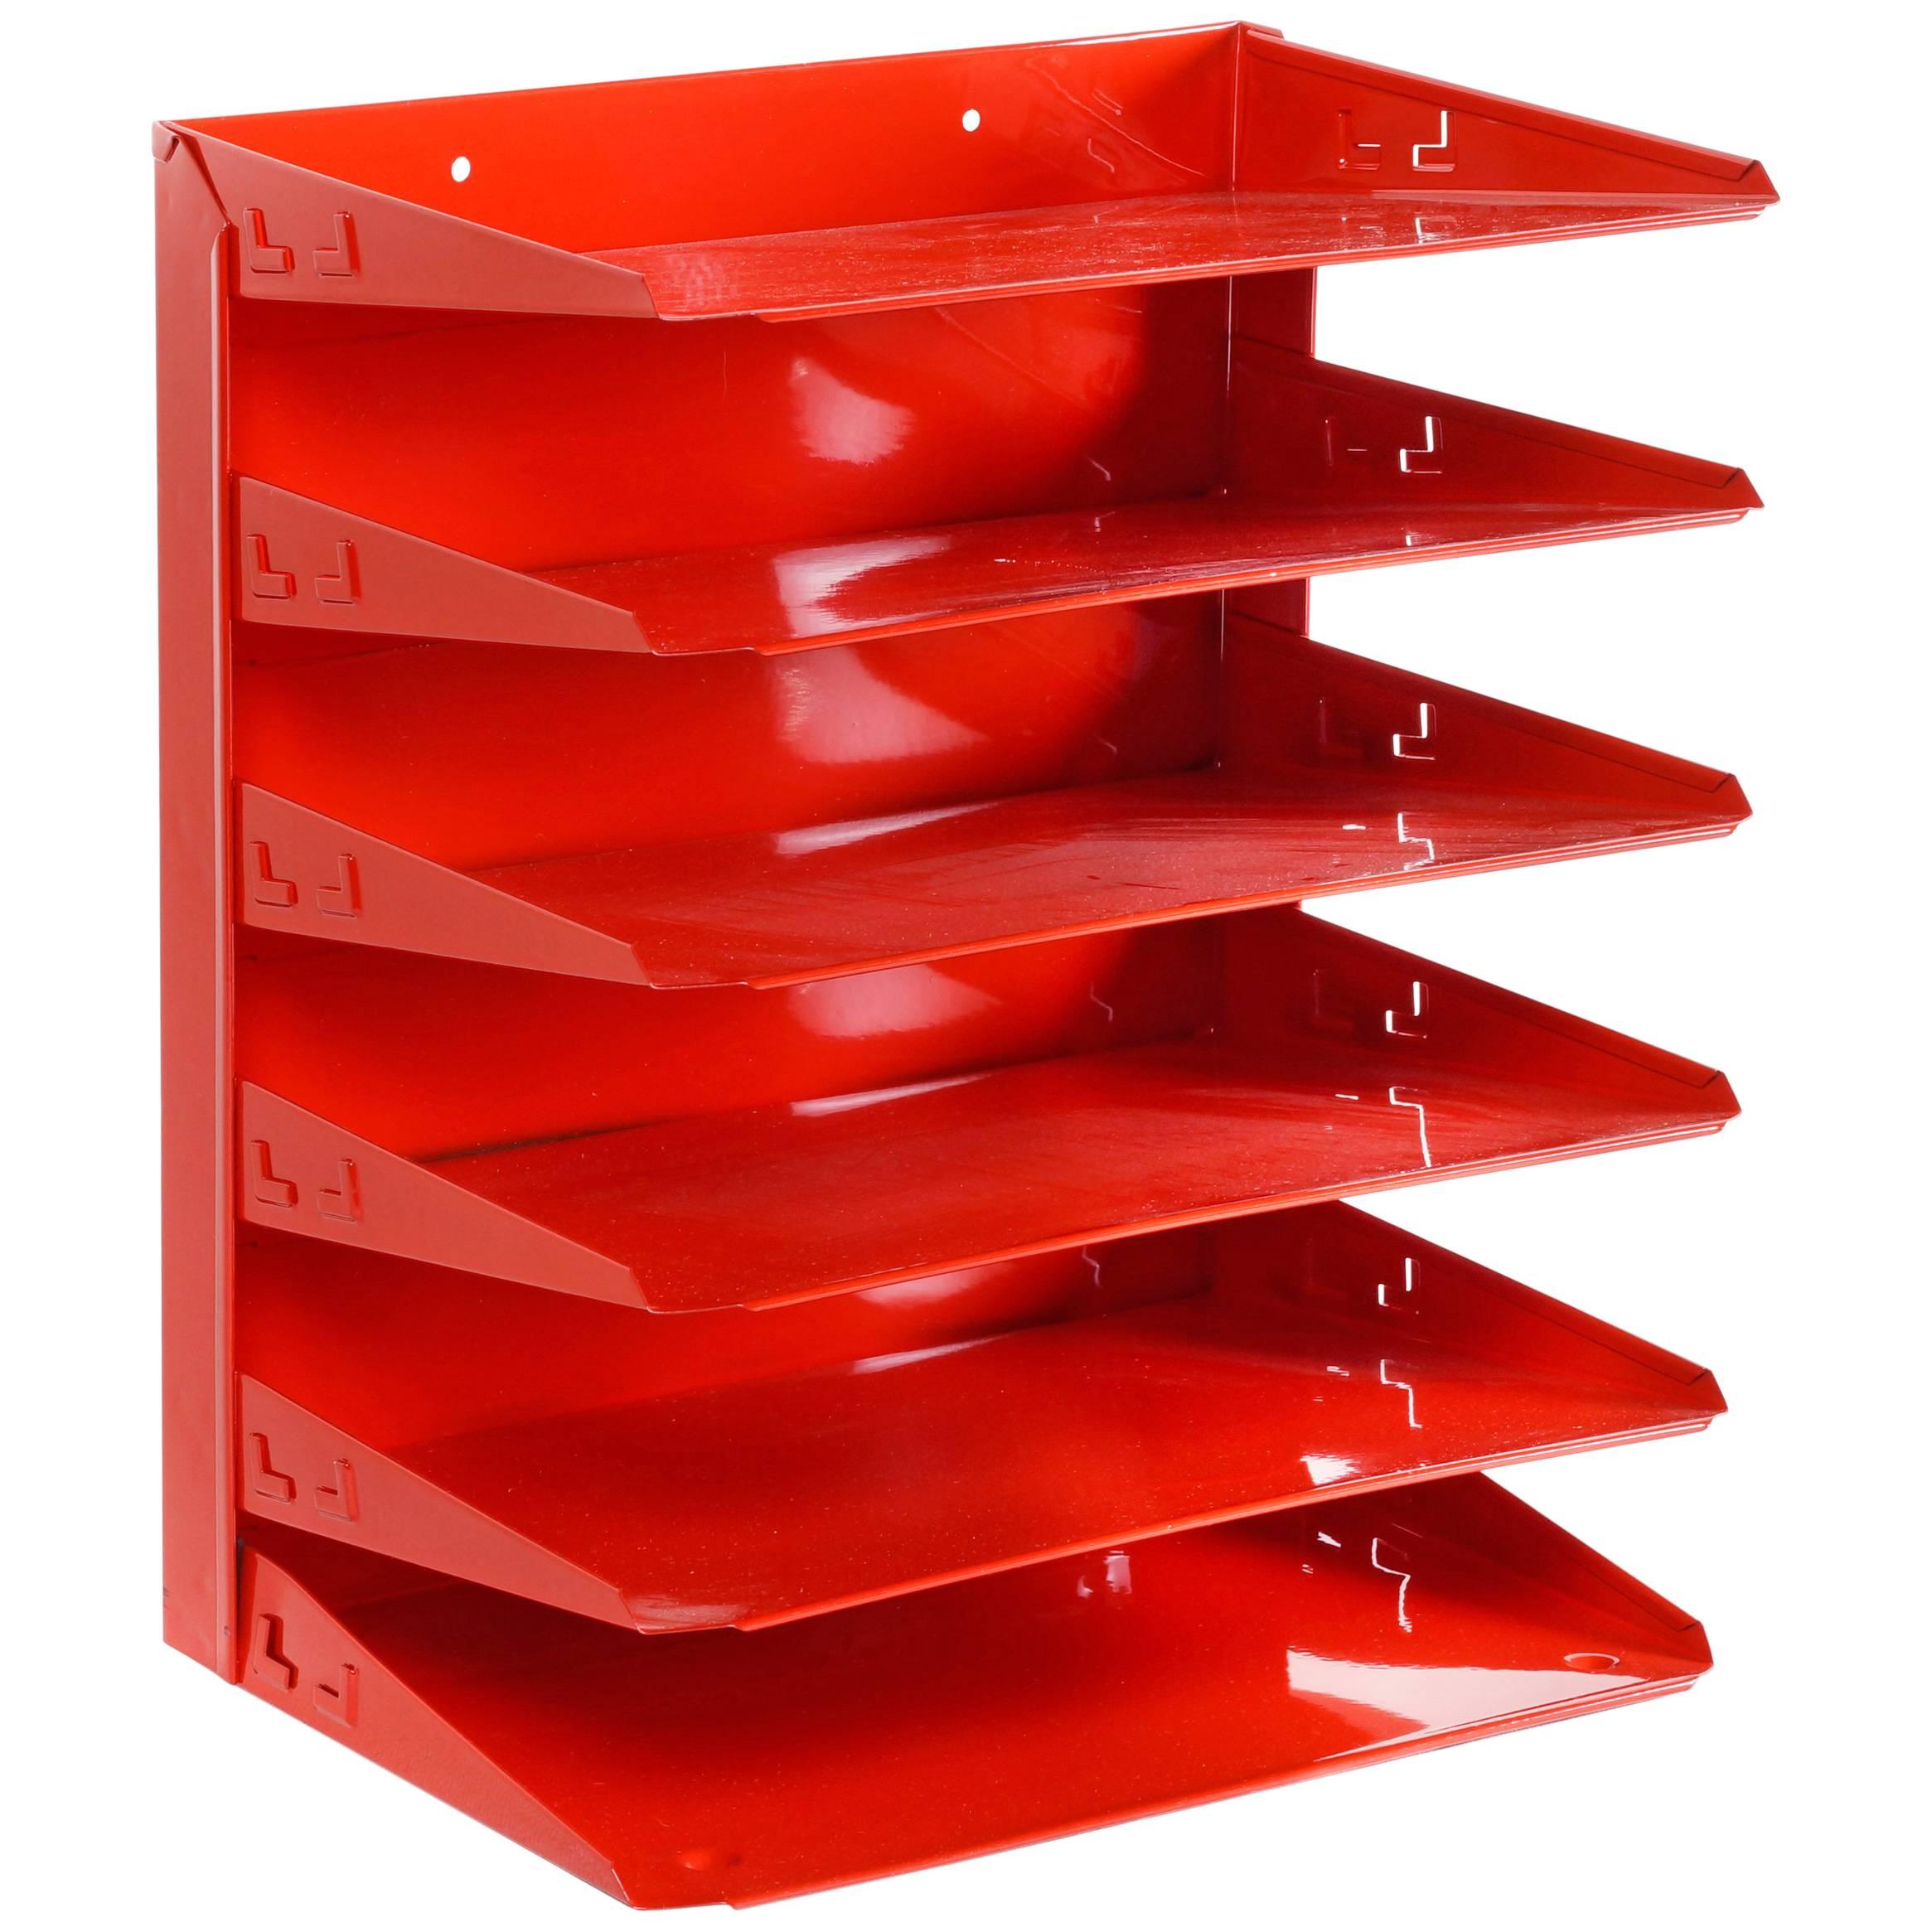 Retro Office Mail Organizer Refinished in Red